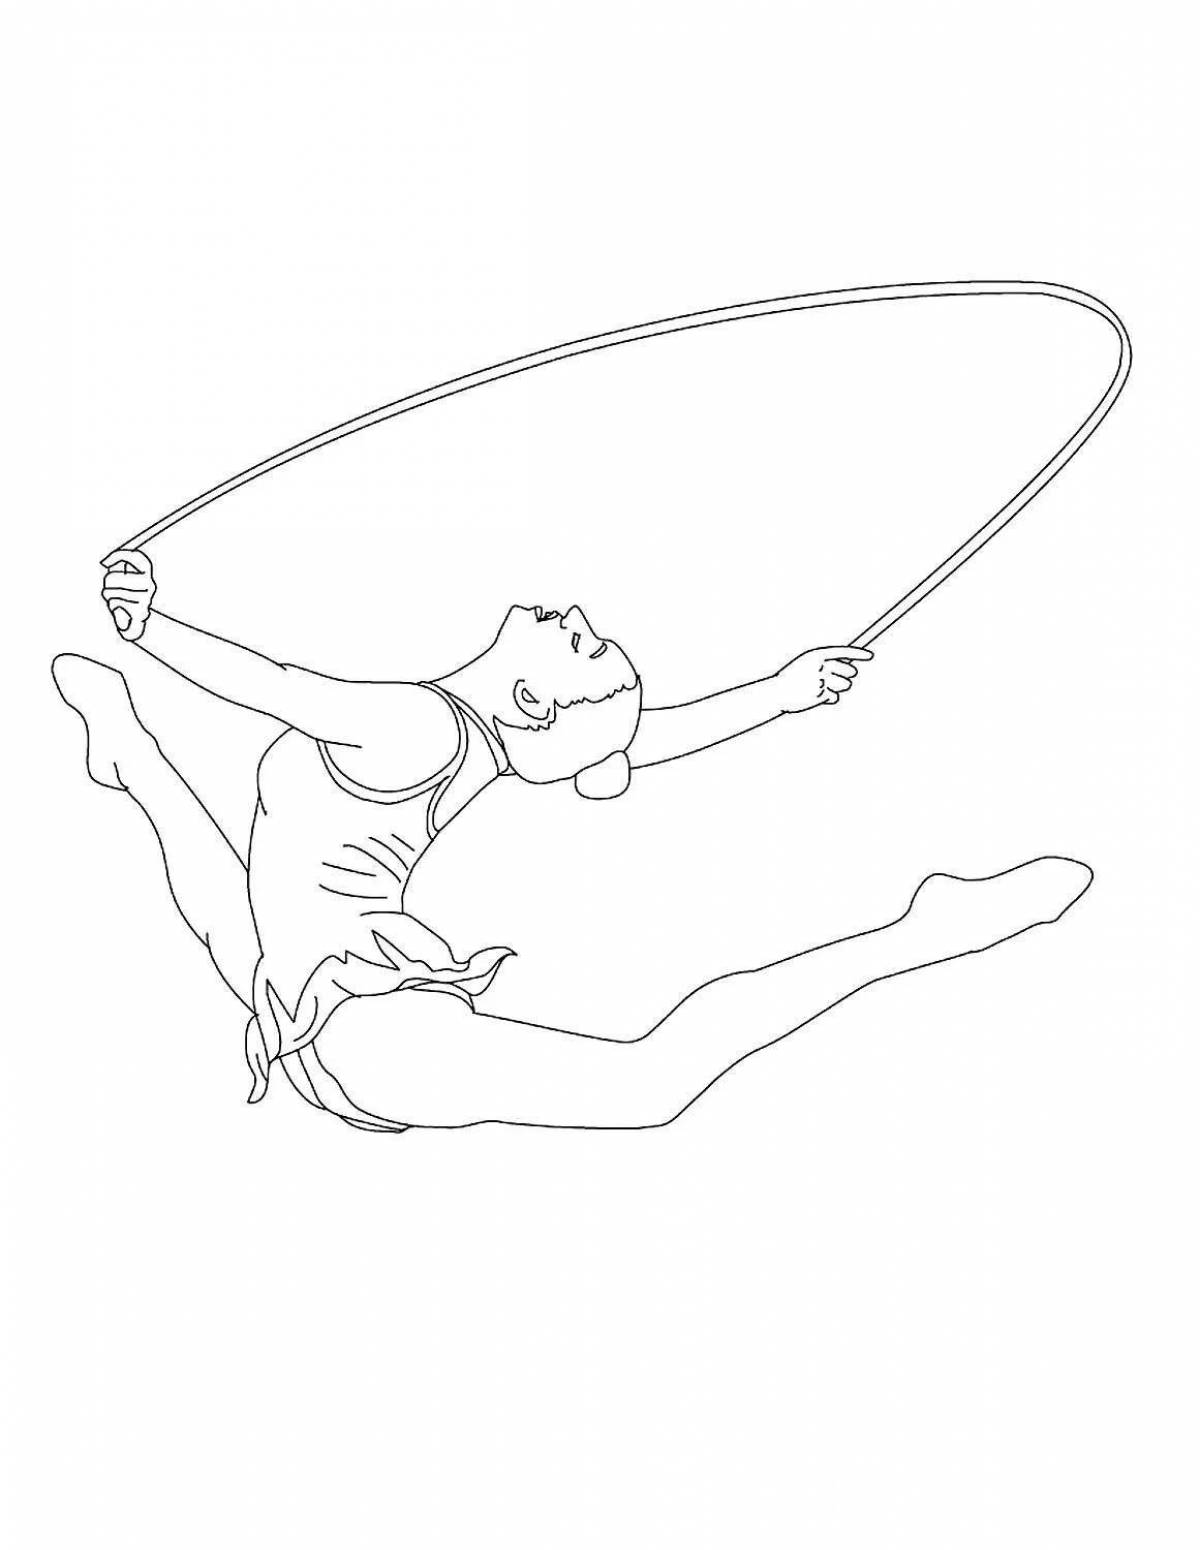 Vibrant gymnastic coloring book for girls